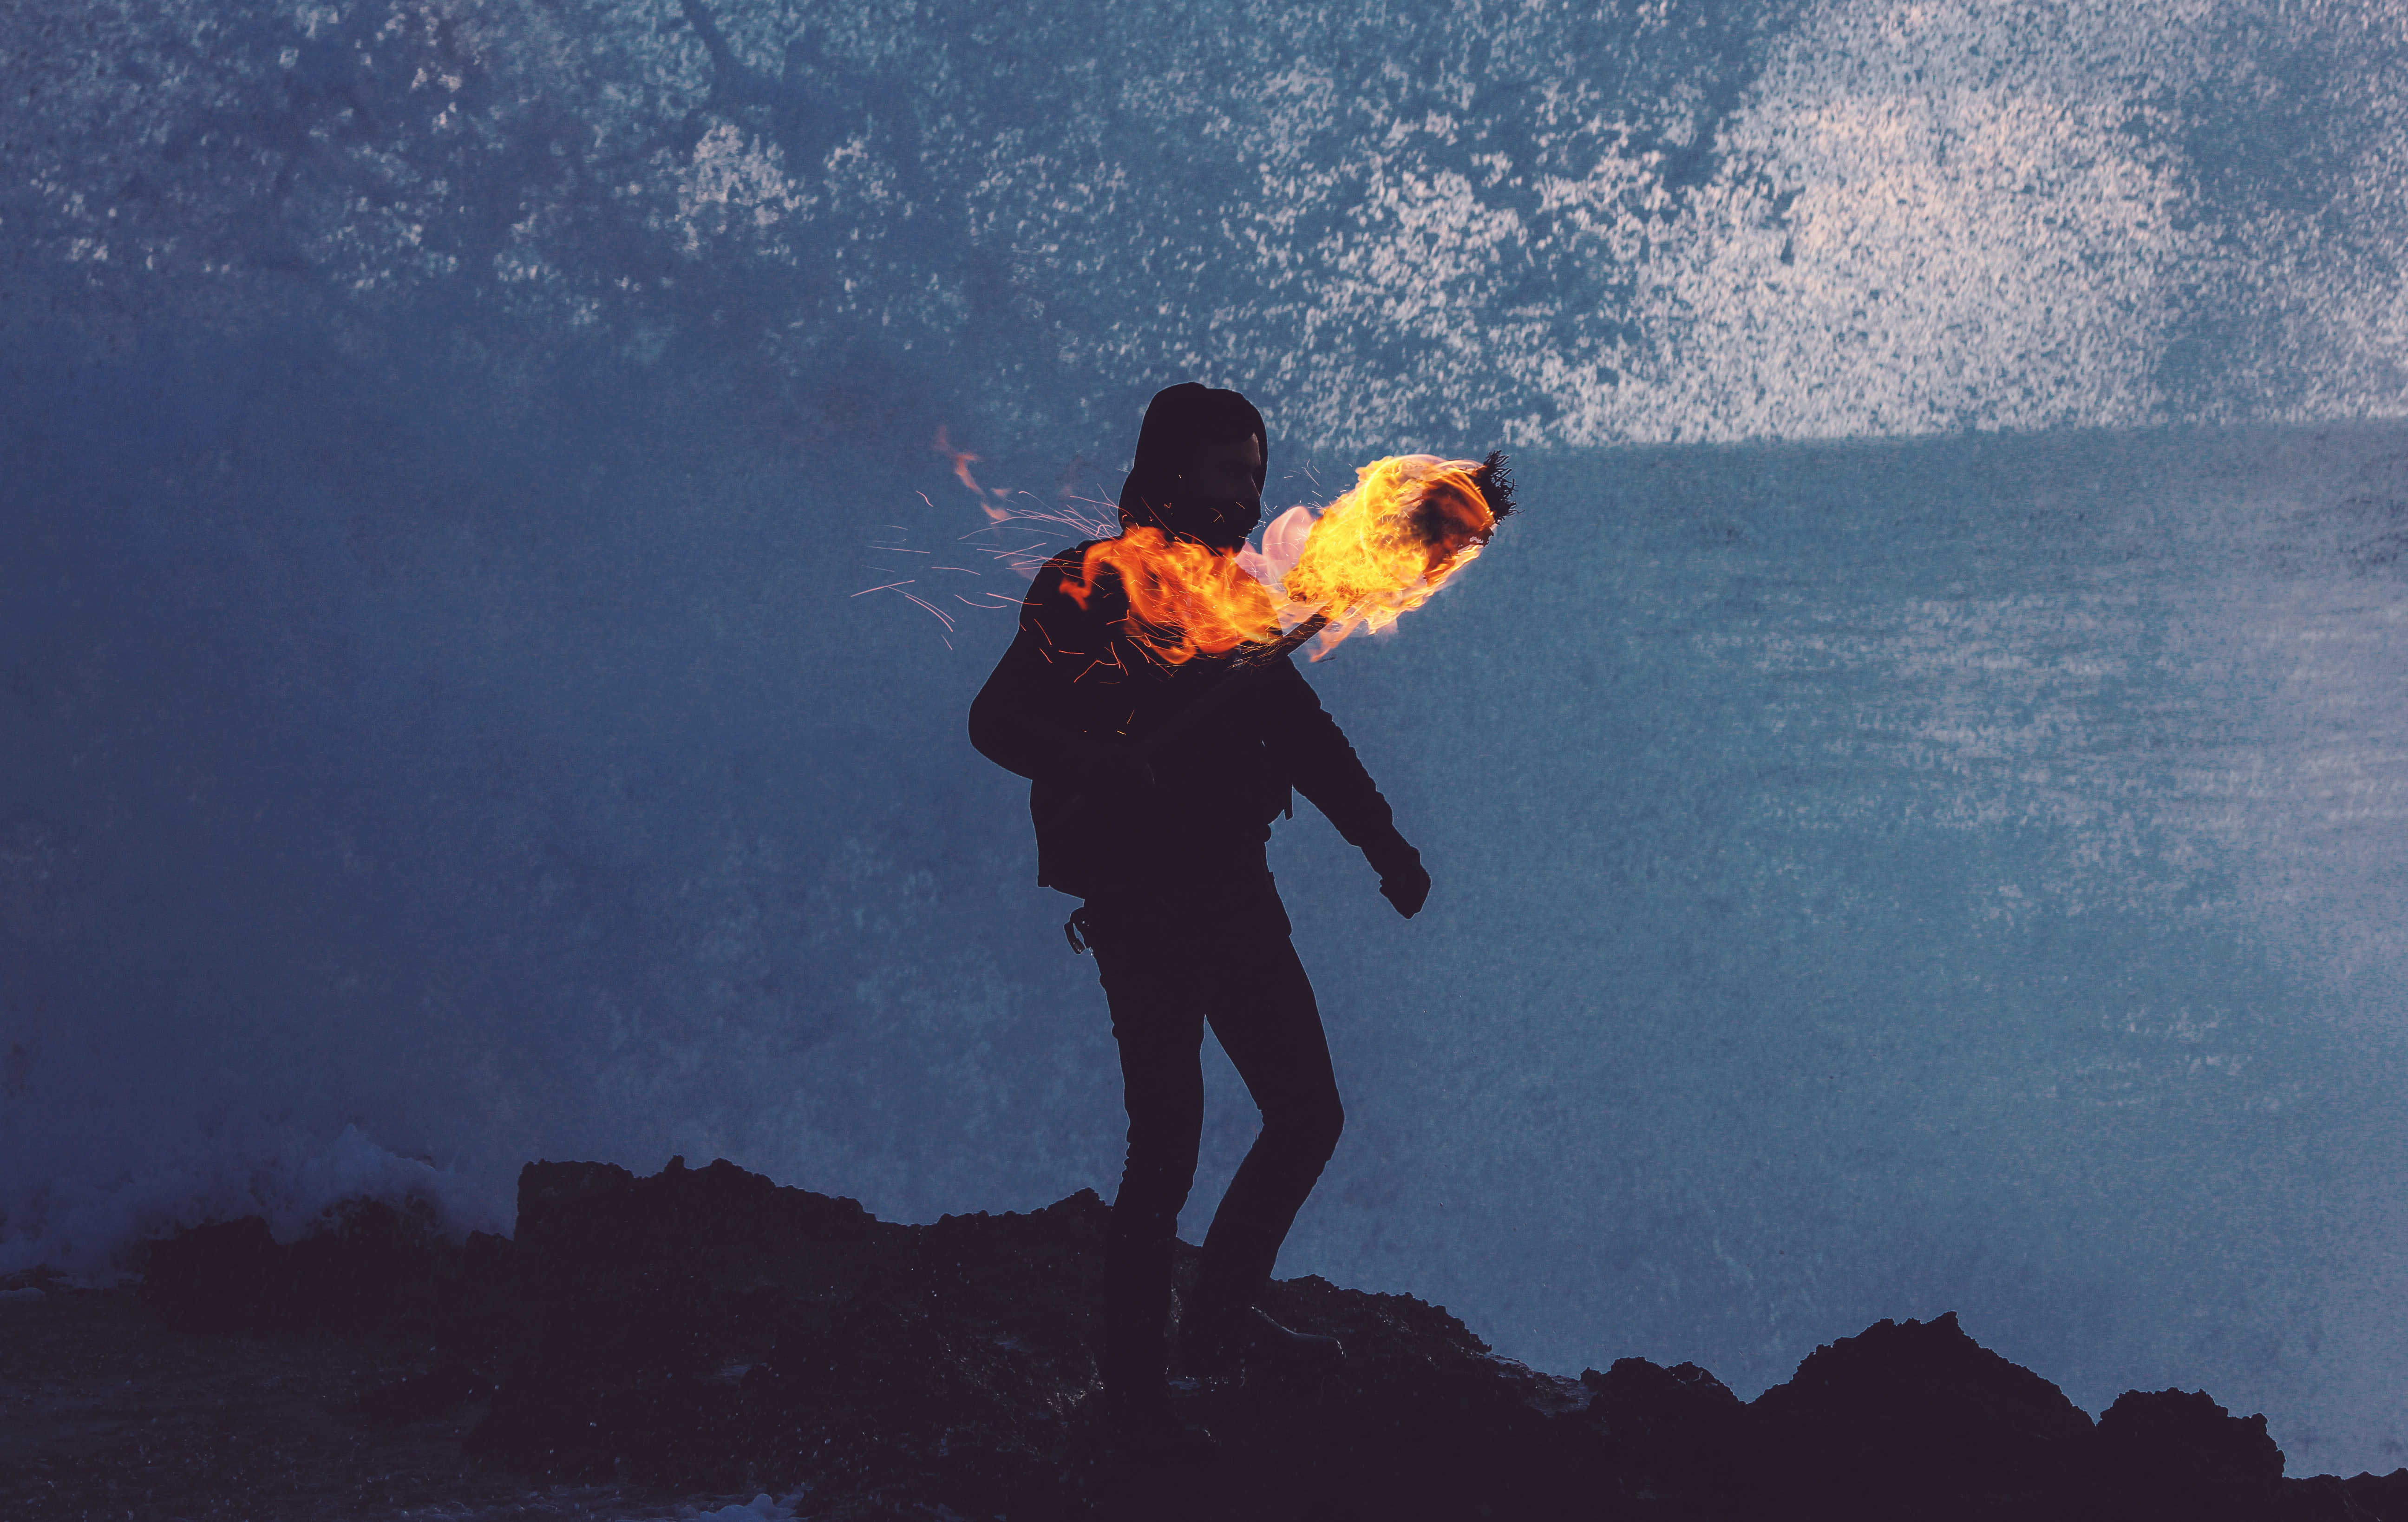 A sillouhette person with a fire torch in their hand, walking over rocky terrain. By Aziz Acharki on Unsplash